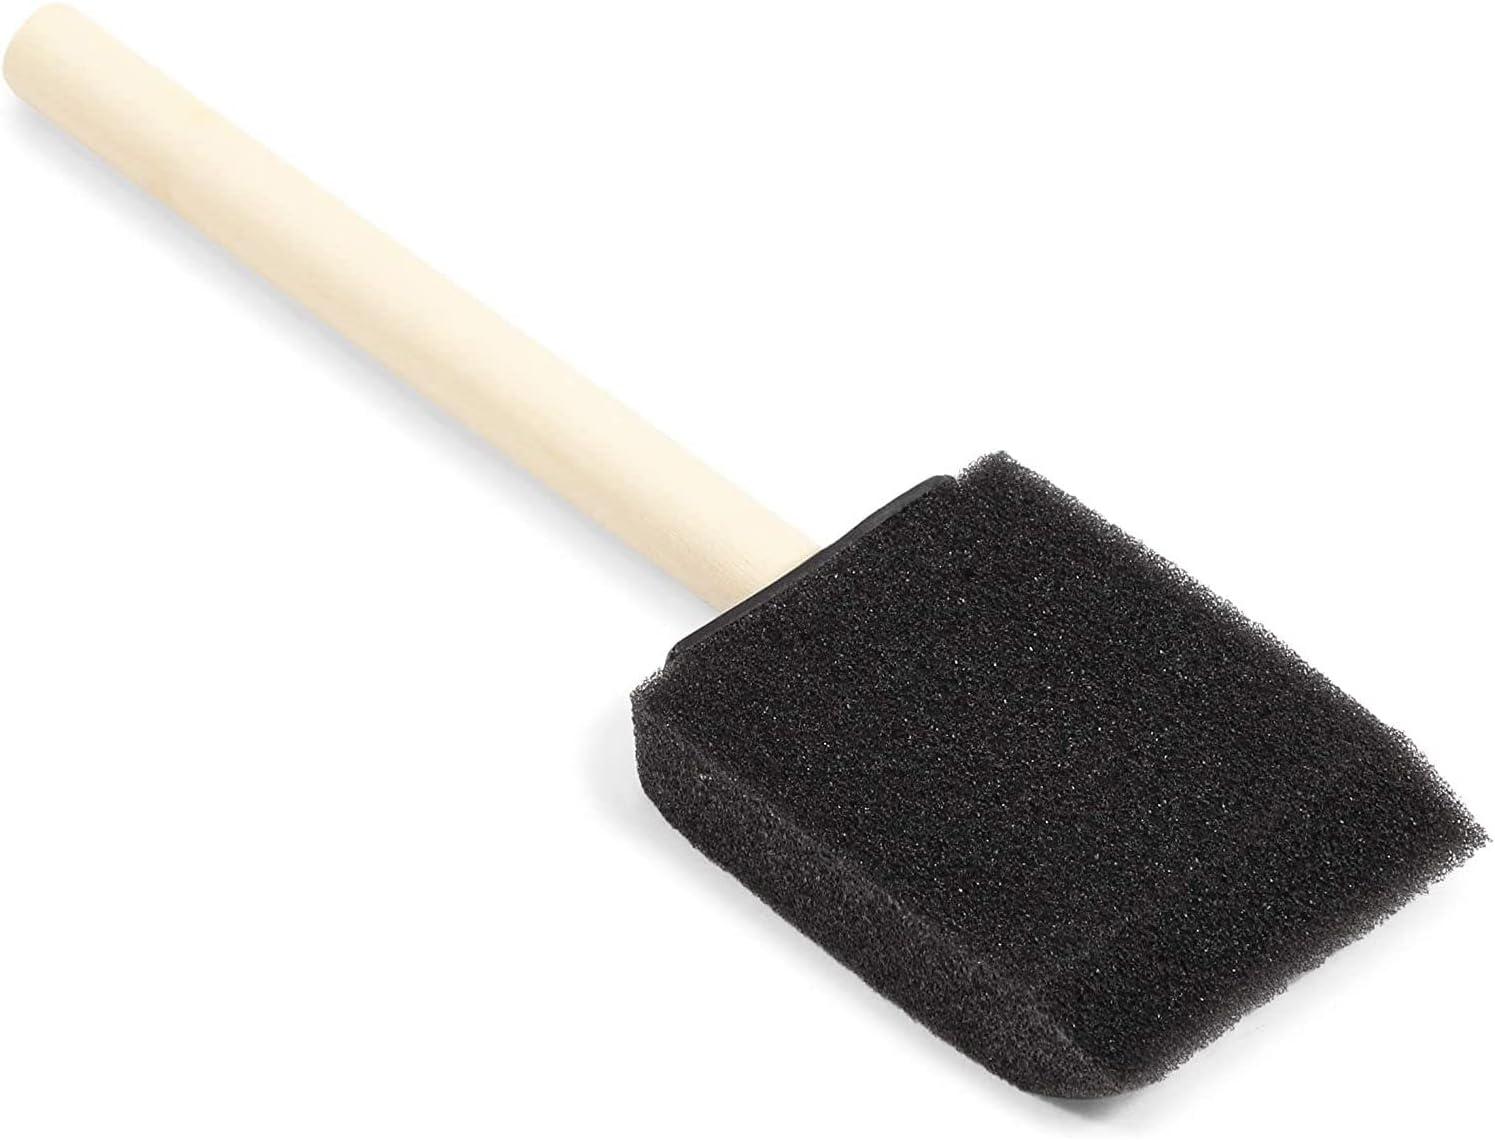 Black Foam Brush, Foam Brush Light Weight Long Time Use Easy to Hold with Beveled Sponge Tip for Paint Pigments and Other Media